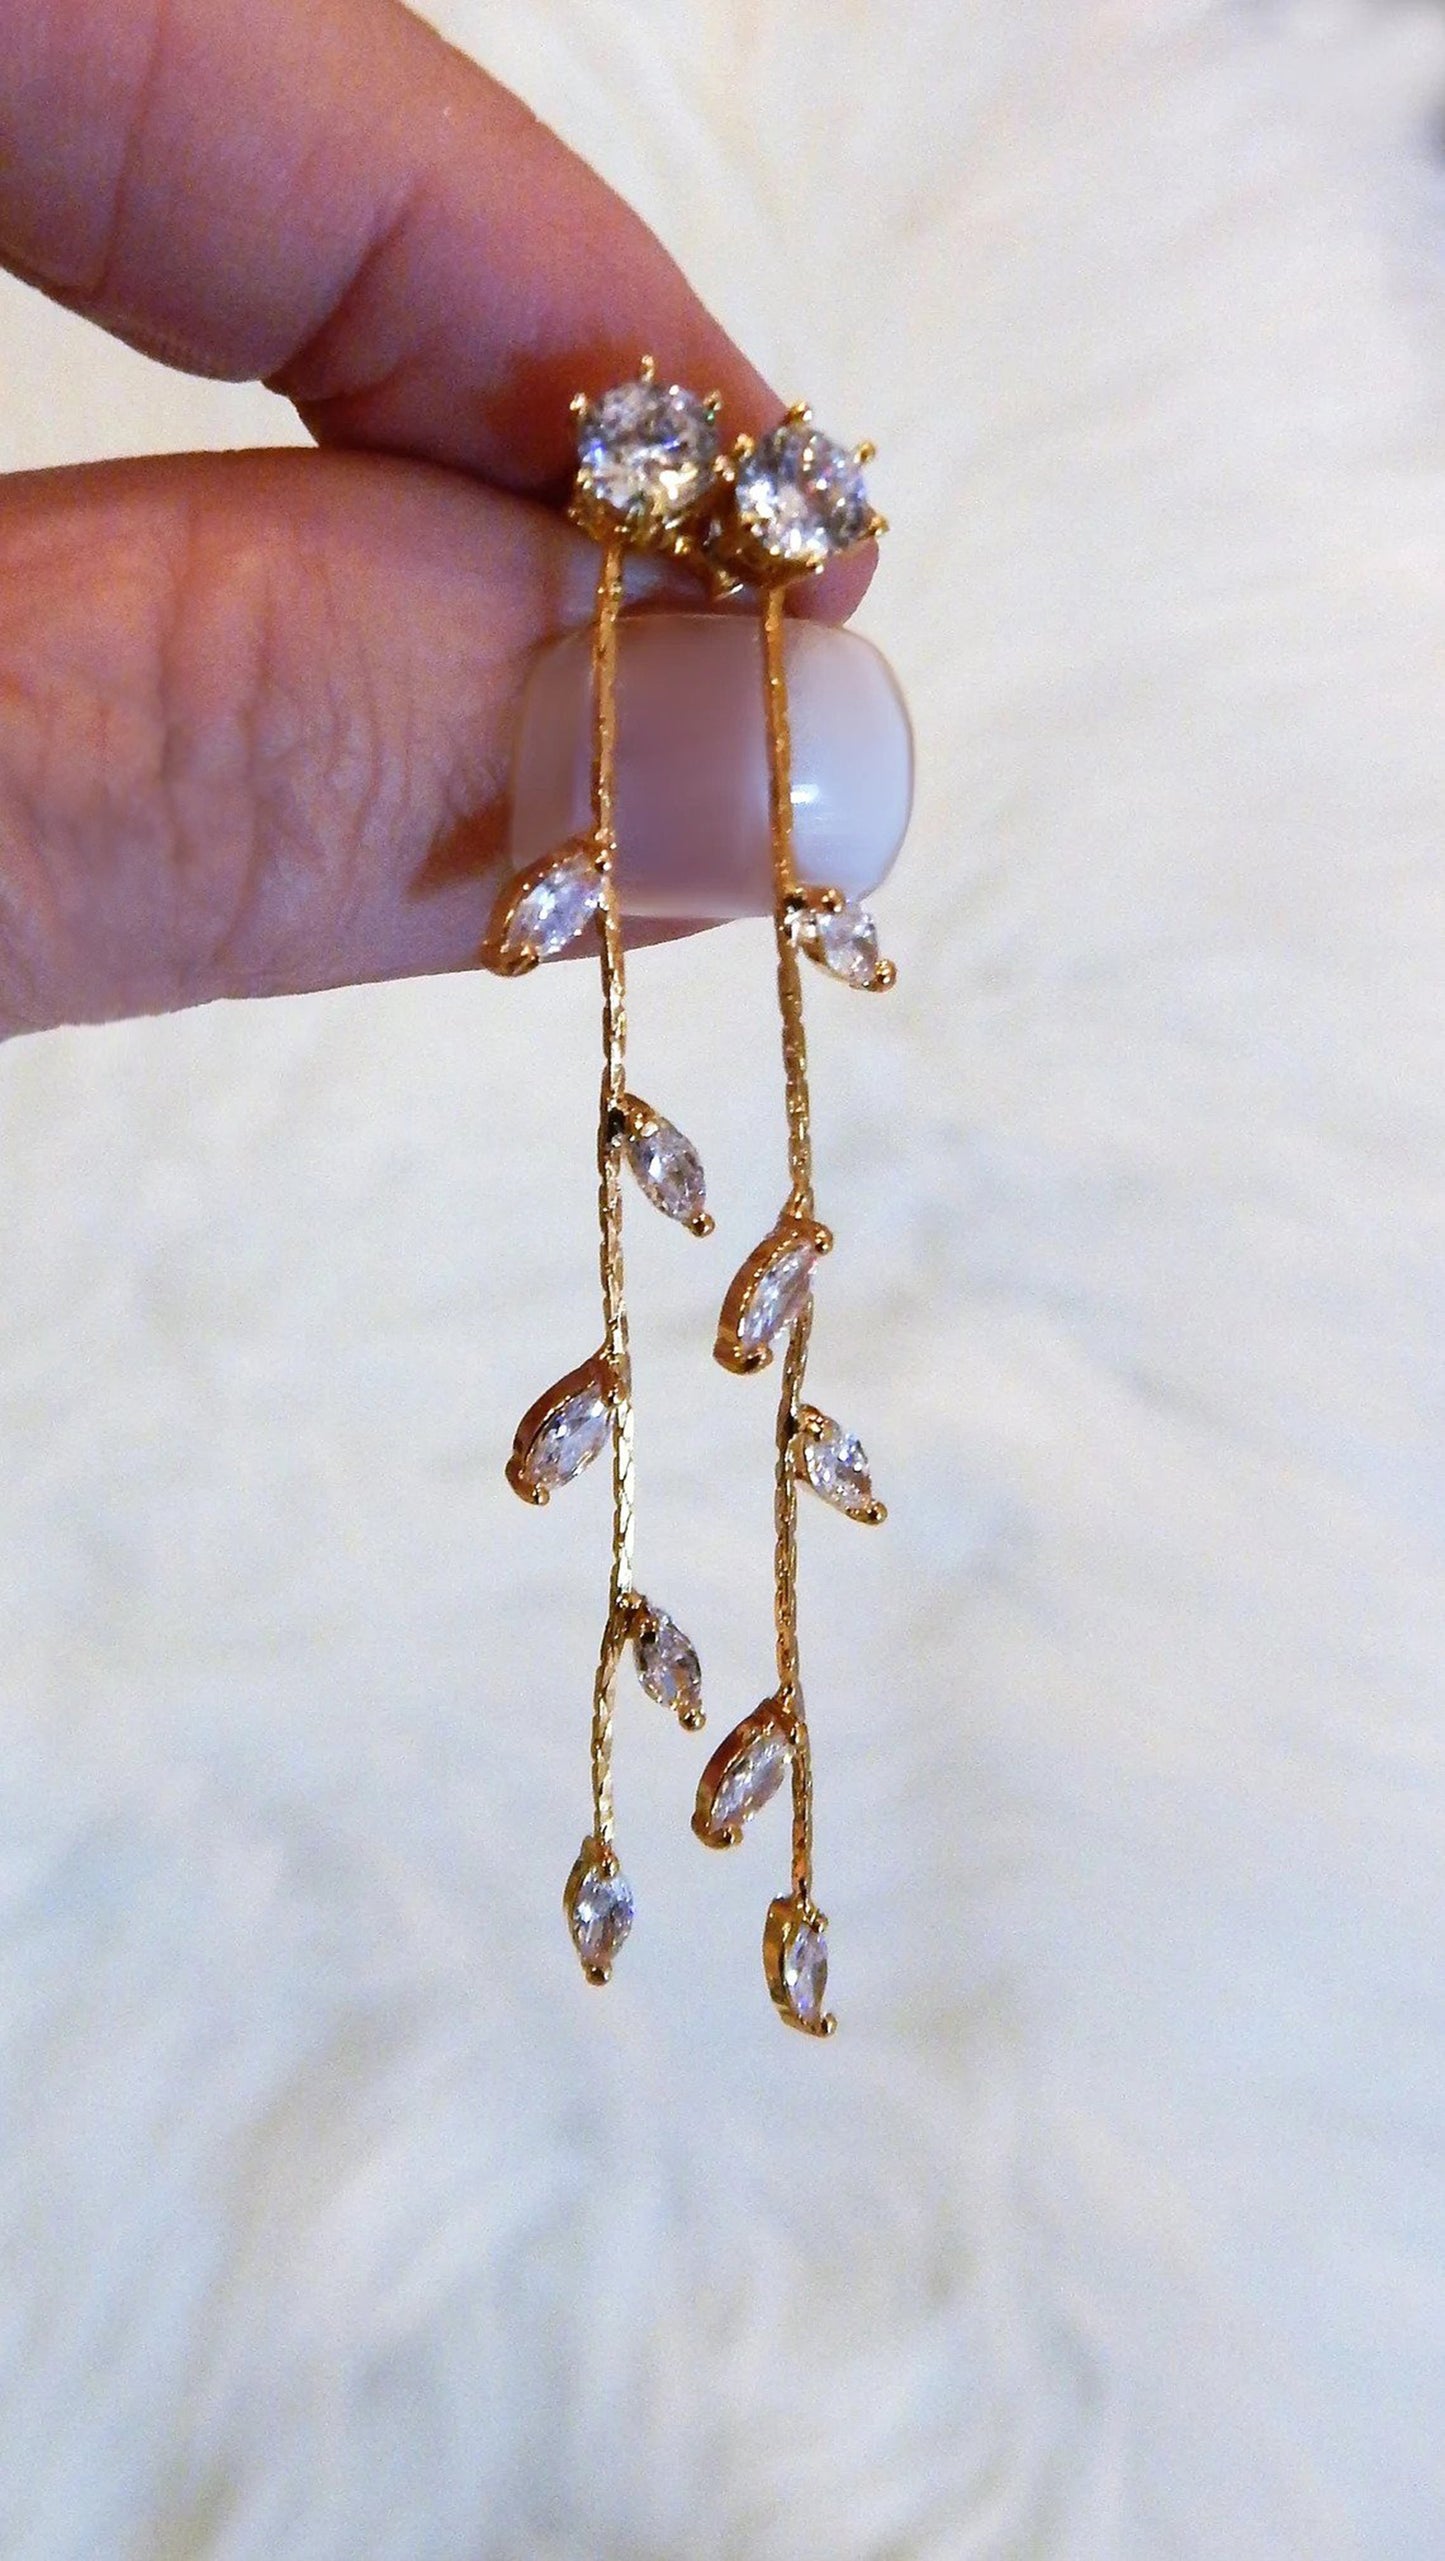 Two earrings with a 3 inch drop and diamond cubic zirconias are held between a womans fingers against a white background.